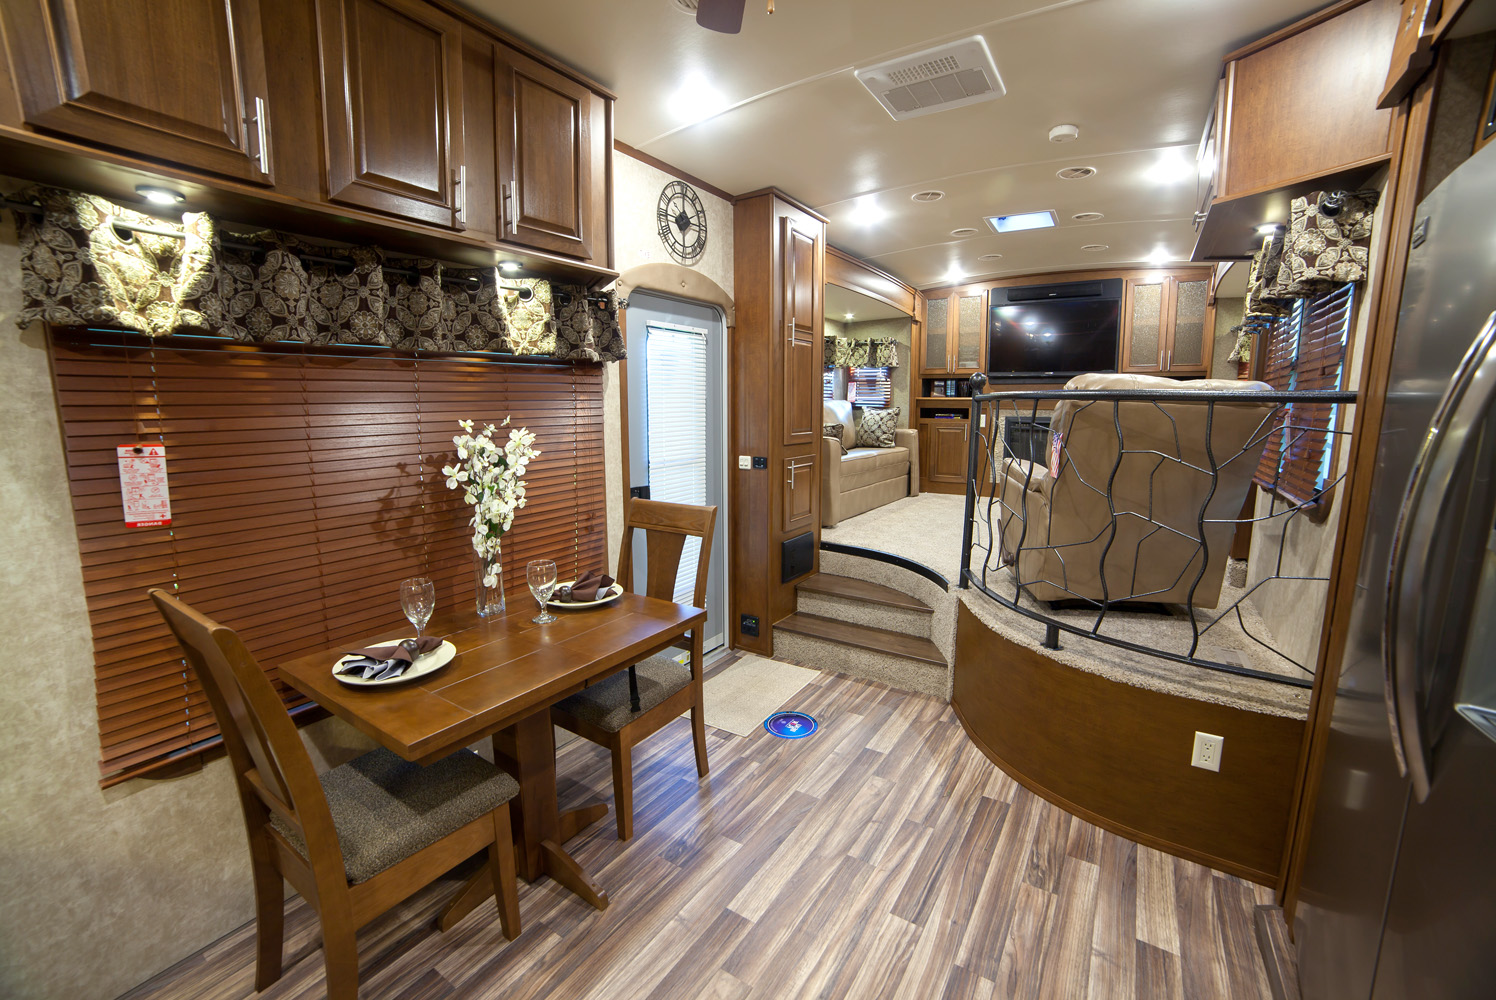 5th Wheel Rvs With Front Living Room